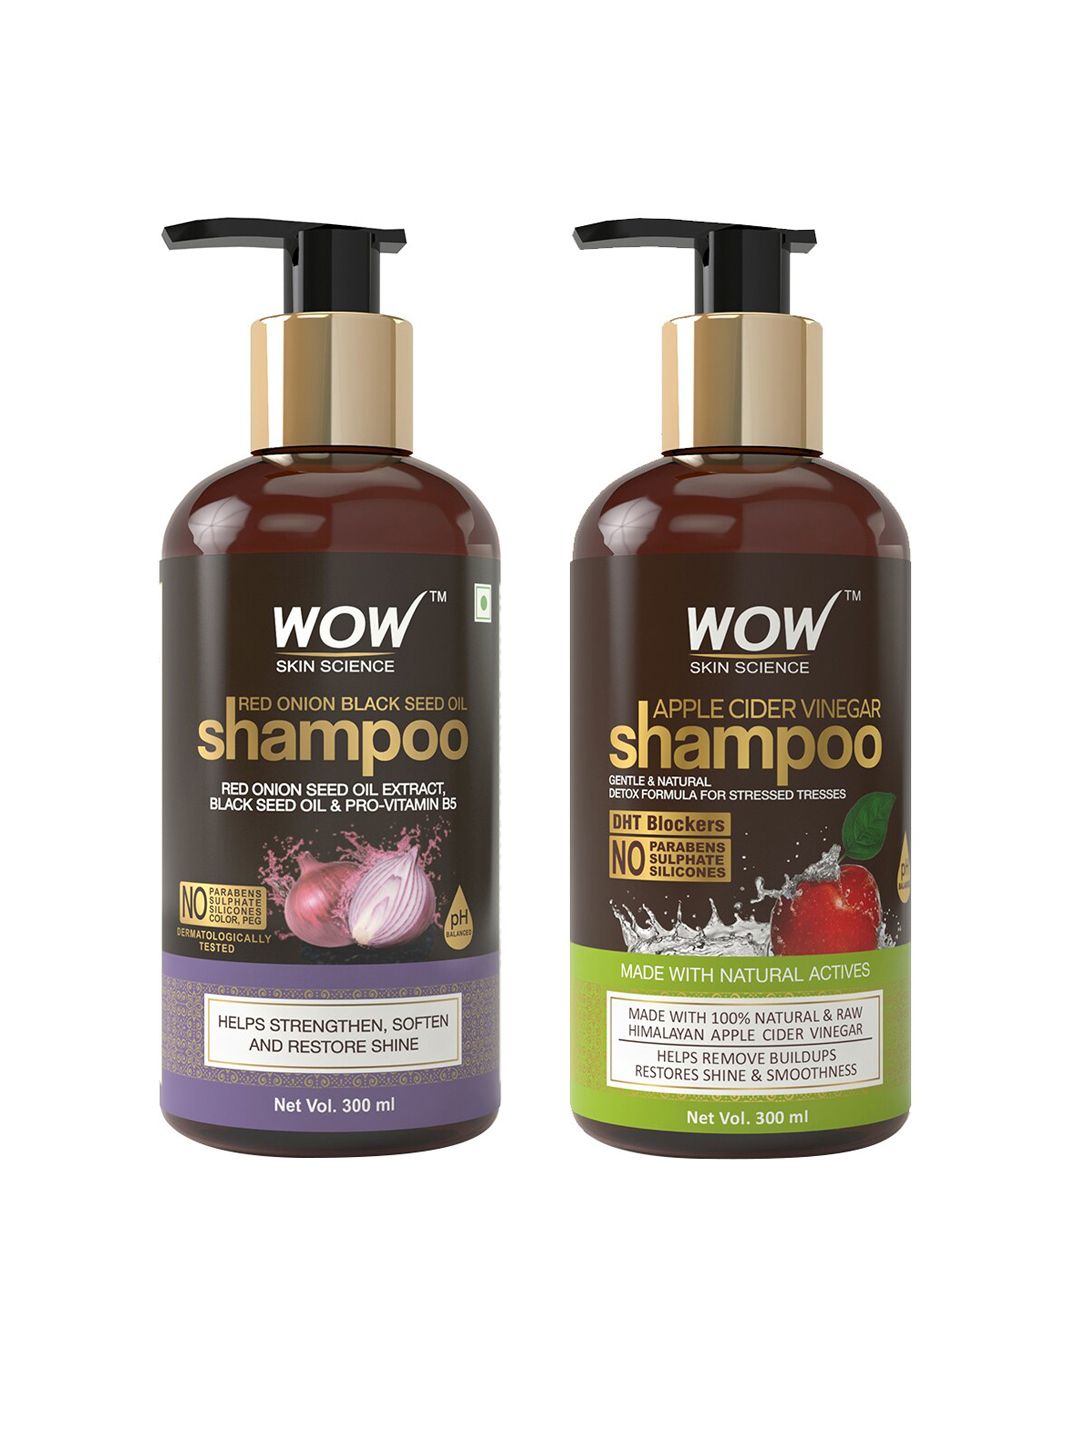 WOW SKIN SCIENCE Set of 2 Shampoo Price in India